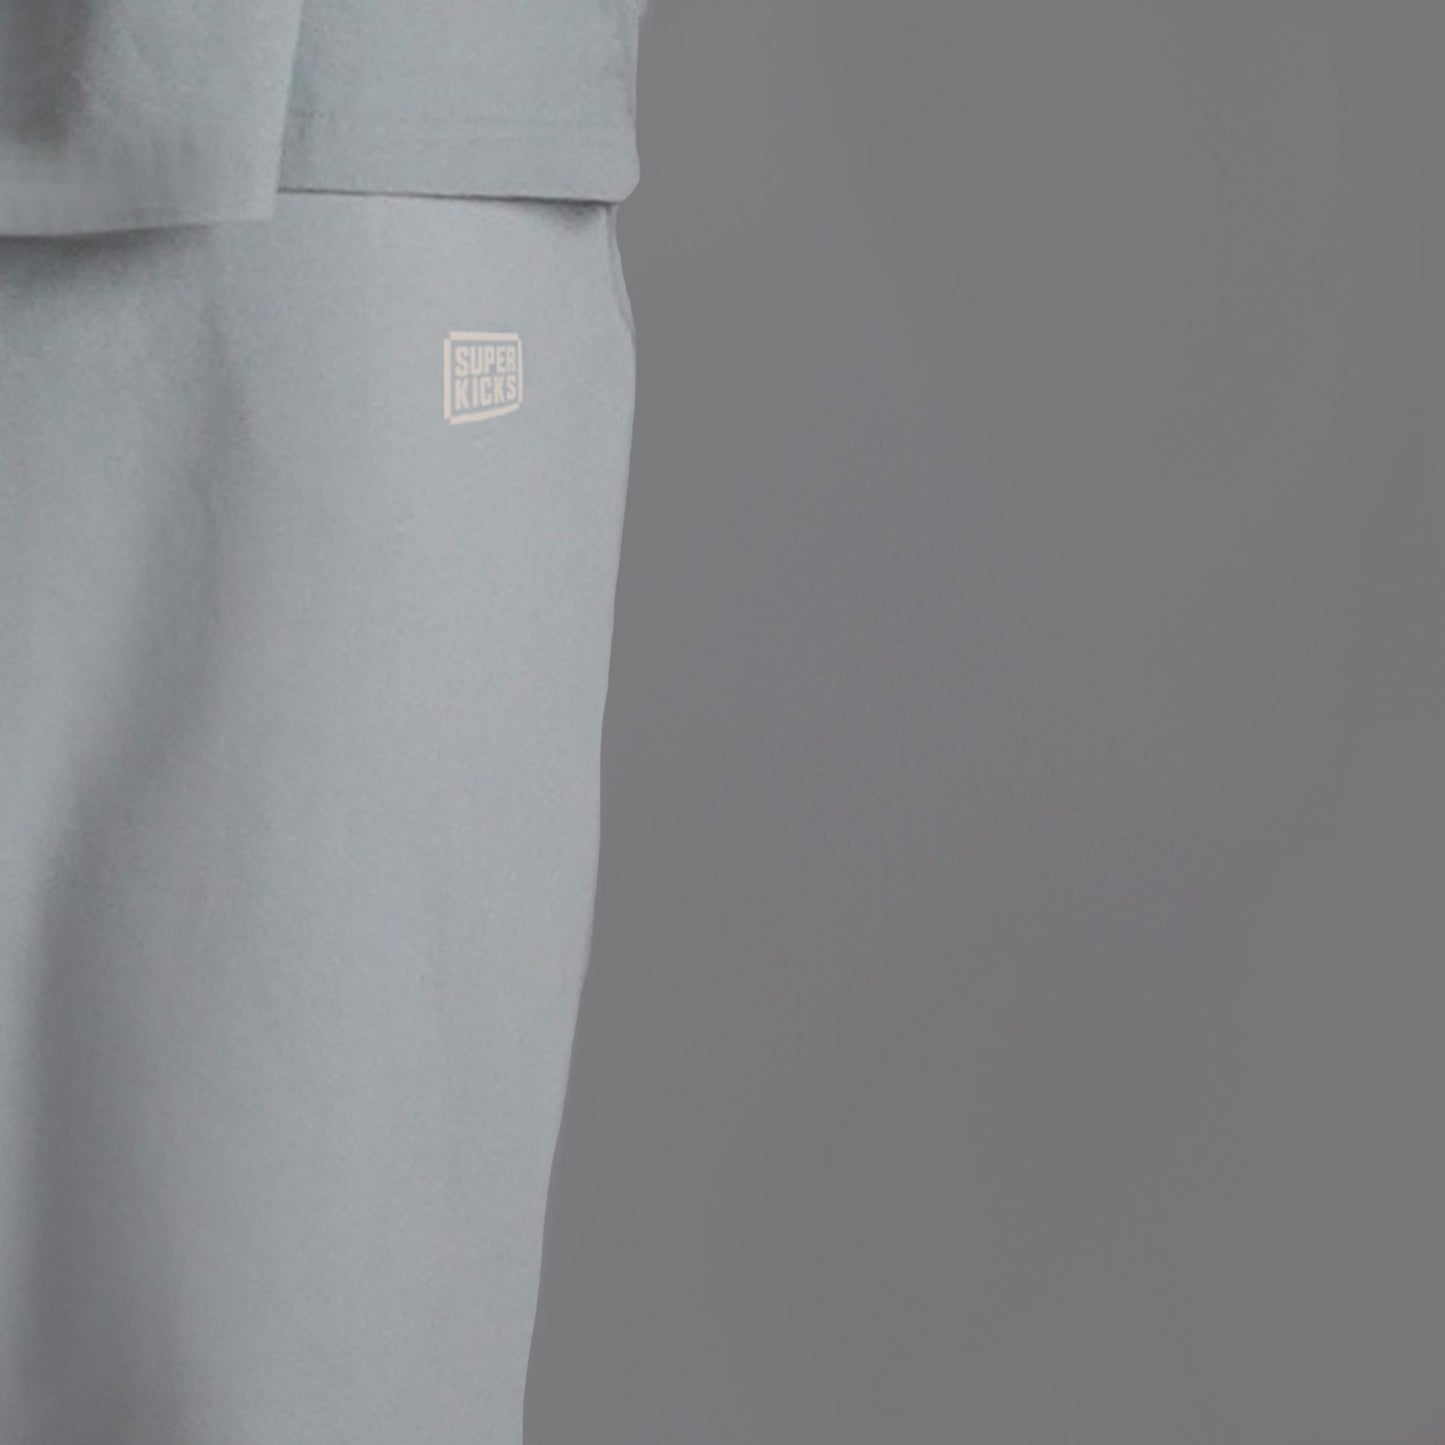 RELAXED FIT JOGGERS GLACIER GREY